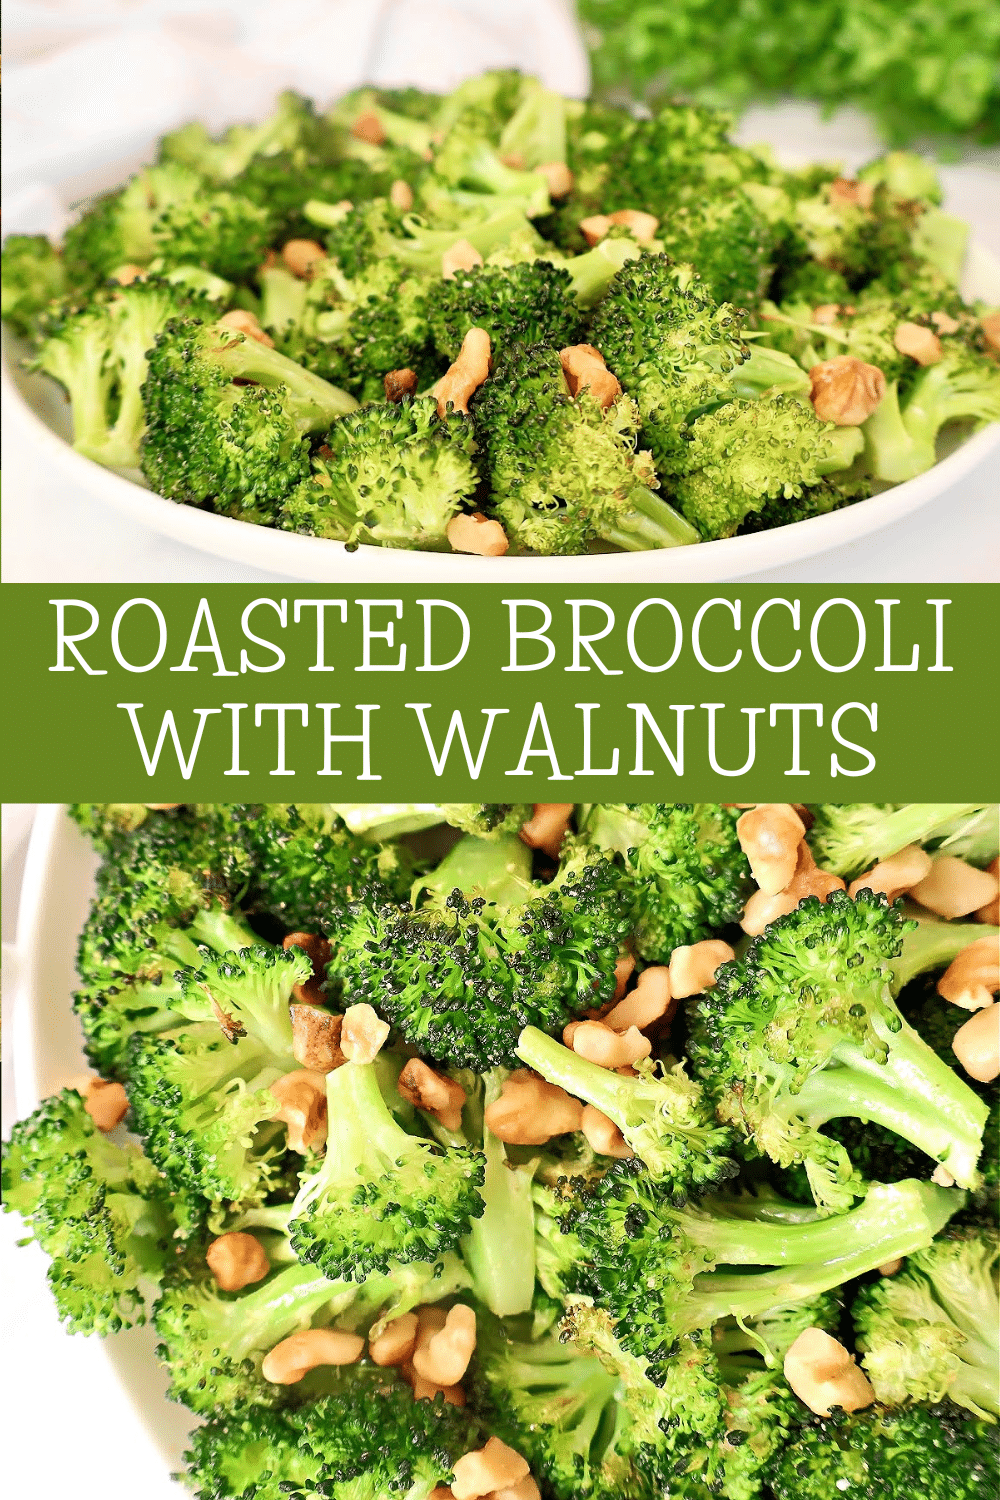 Roasted Broccoli with Walnuts ~ Simple yet flavorful side dish with lightly seasoned fresh broccoli and crunchy walnuts. via @thiswifecooks